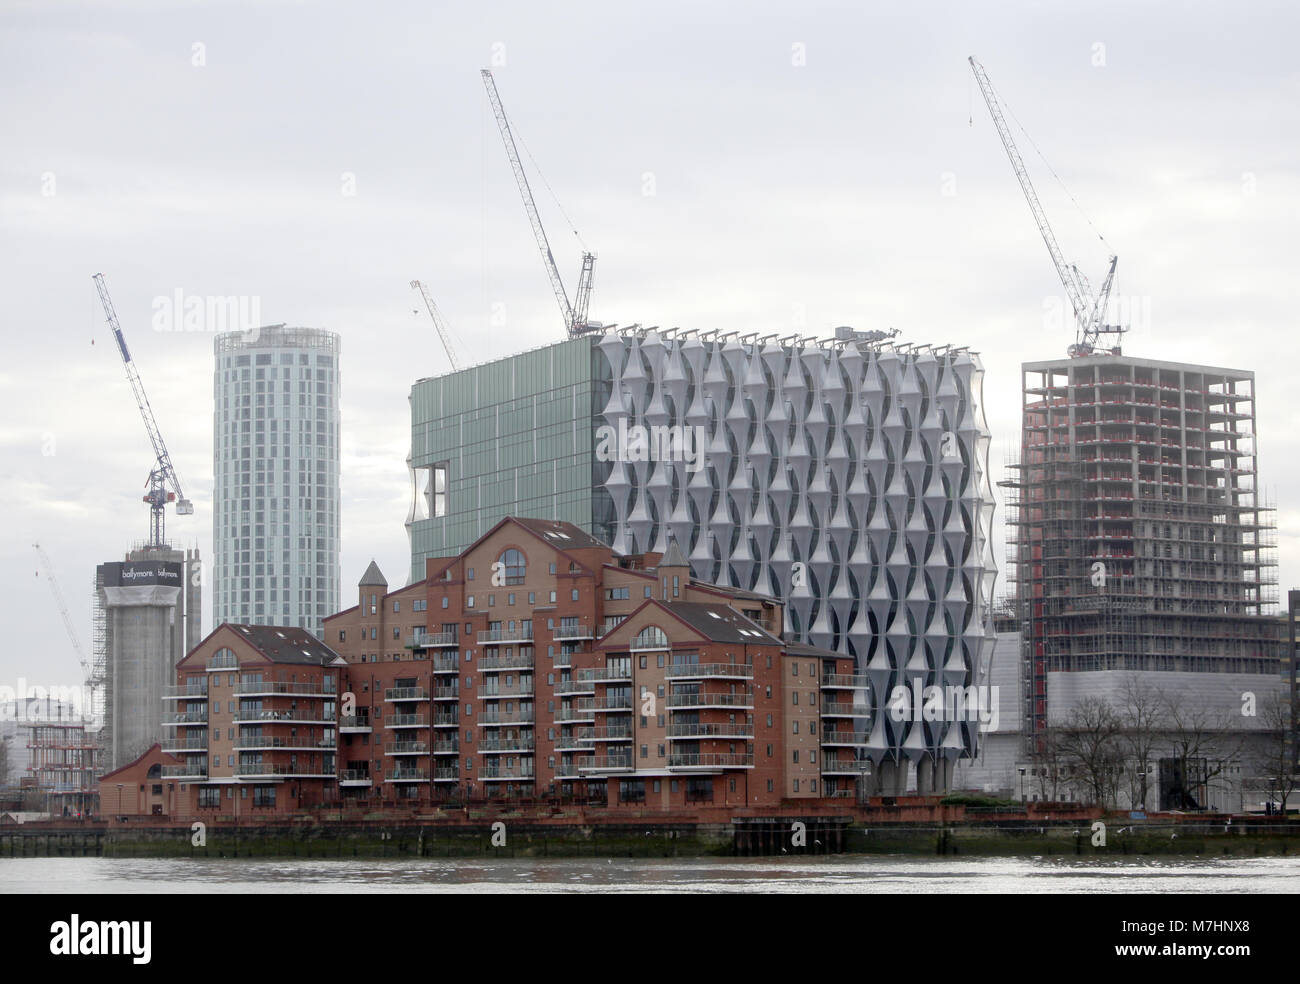 The new U.S. Embassy building is seen in its Nine Elms location on the South side of the River Thames, in London on March 11, 2018. Stock Photo